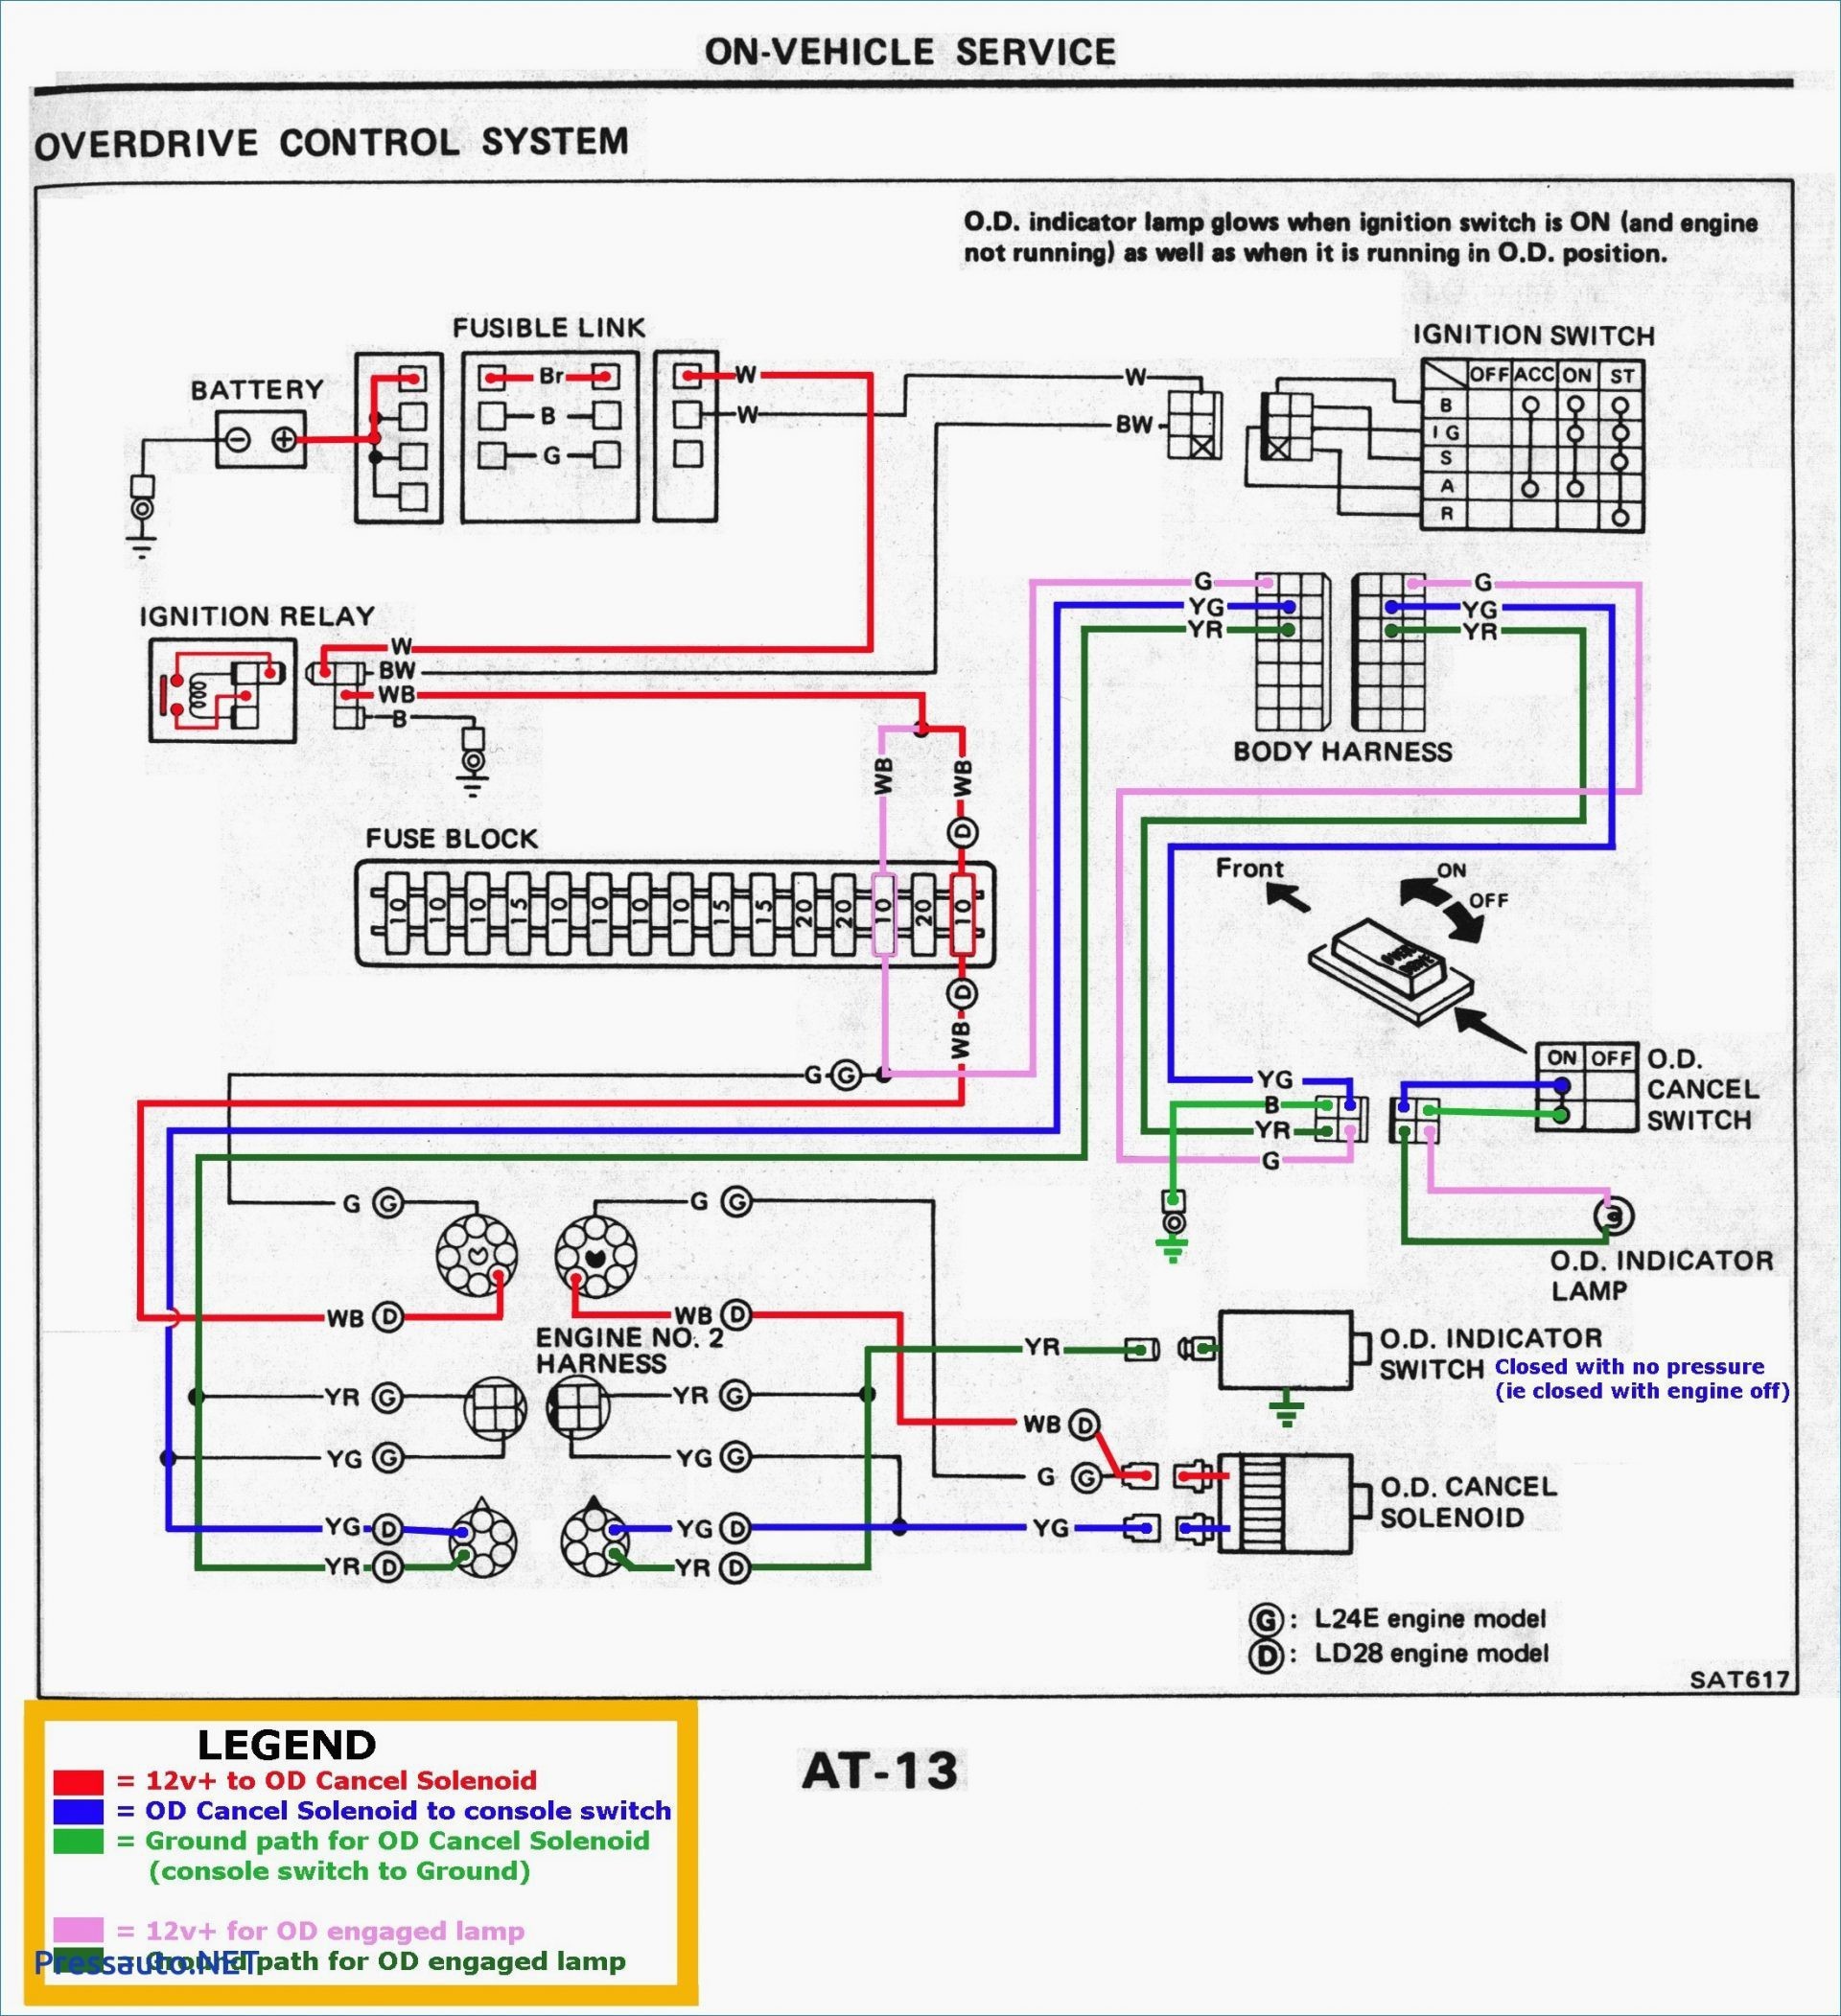 schematic diagram house electrical wiring book of how to wire a rh zookastar led home light circuit diagram LED Light Circuit Diagram